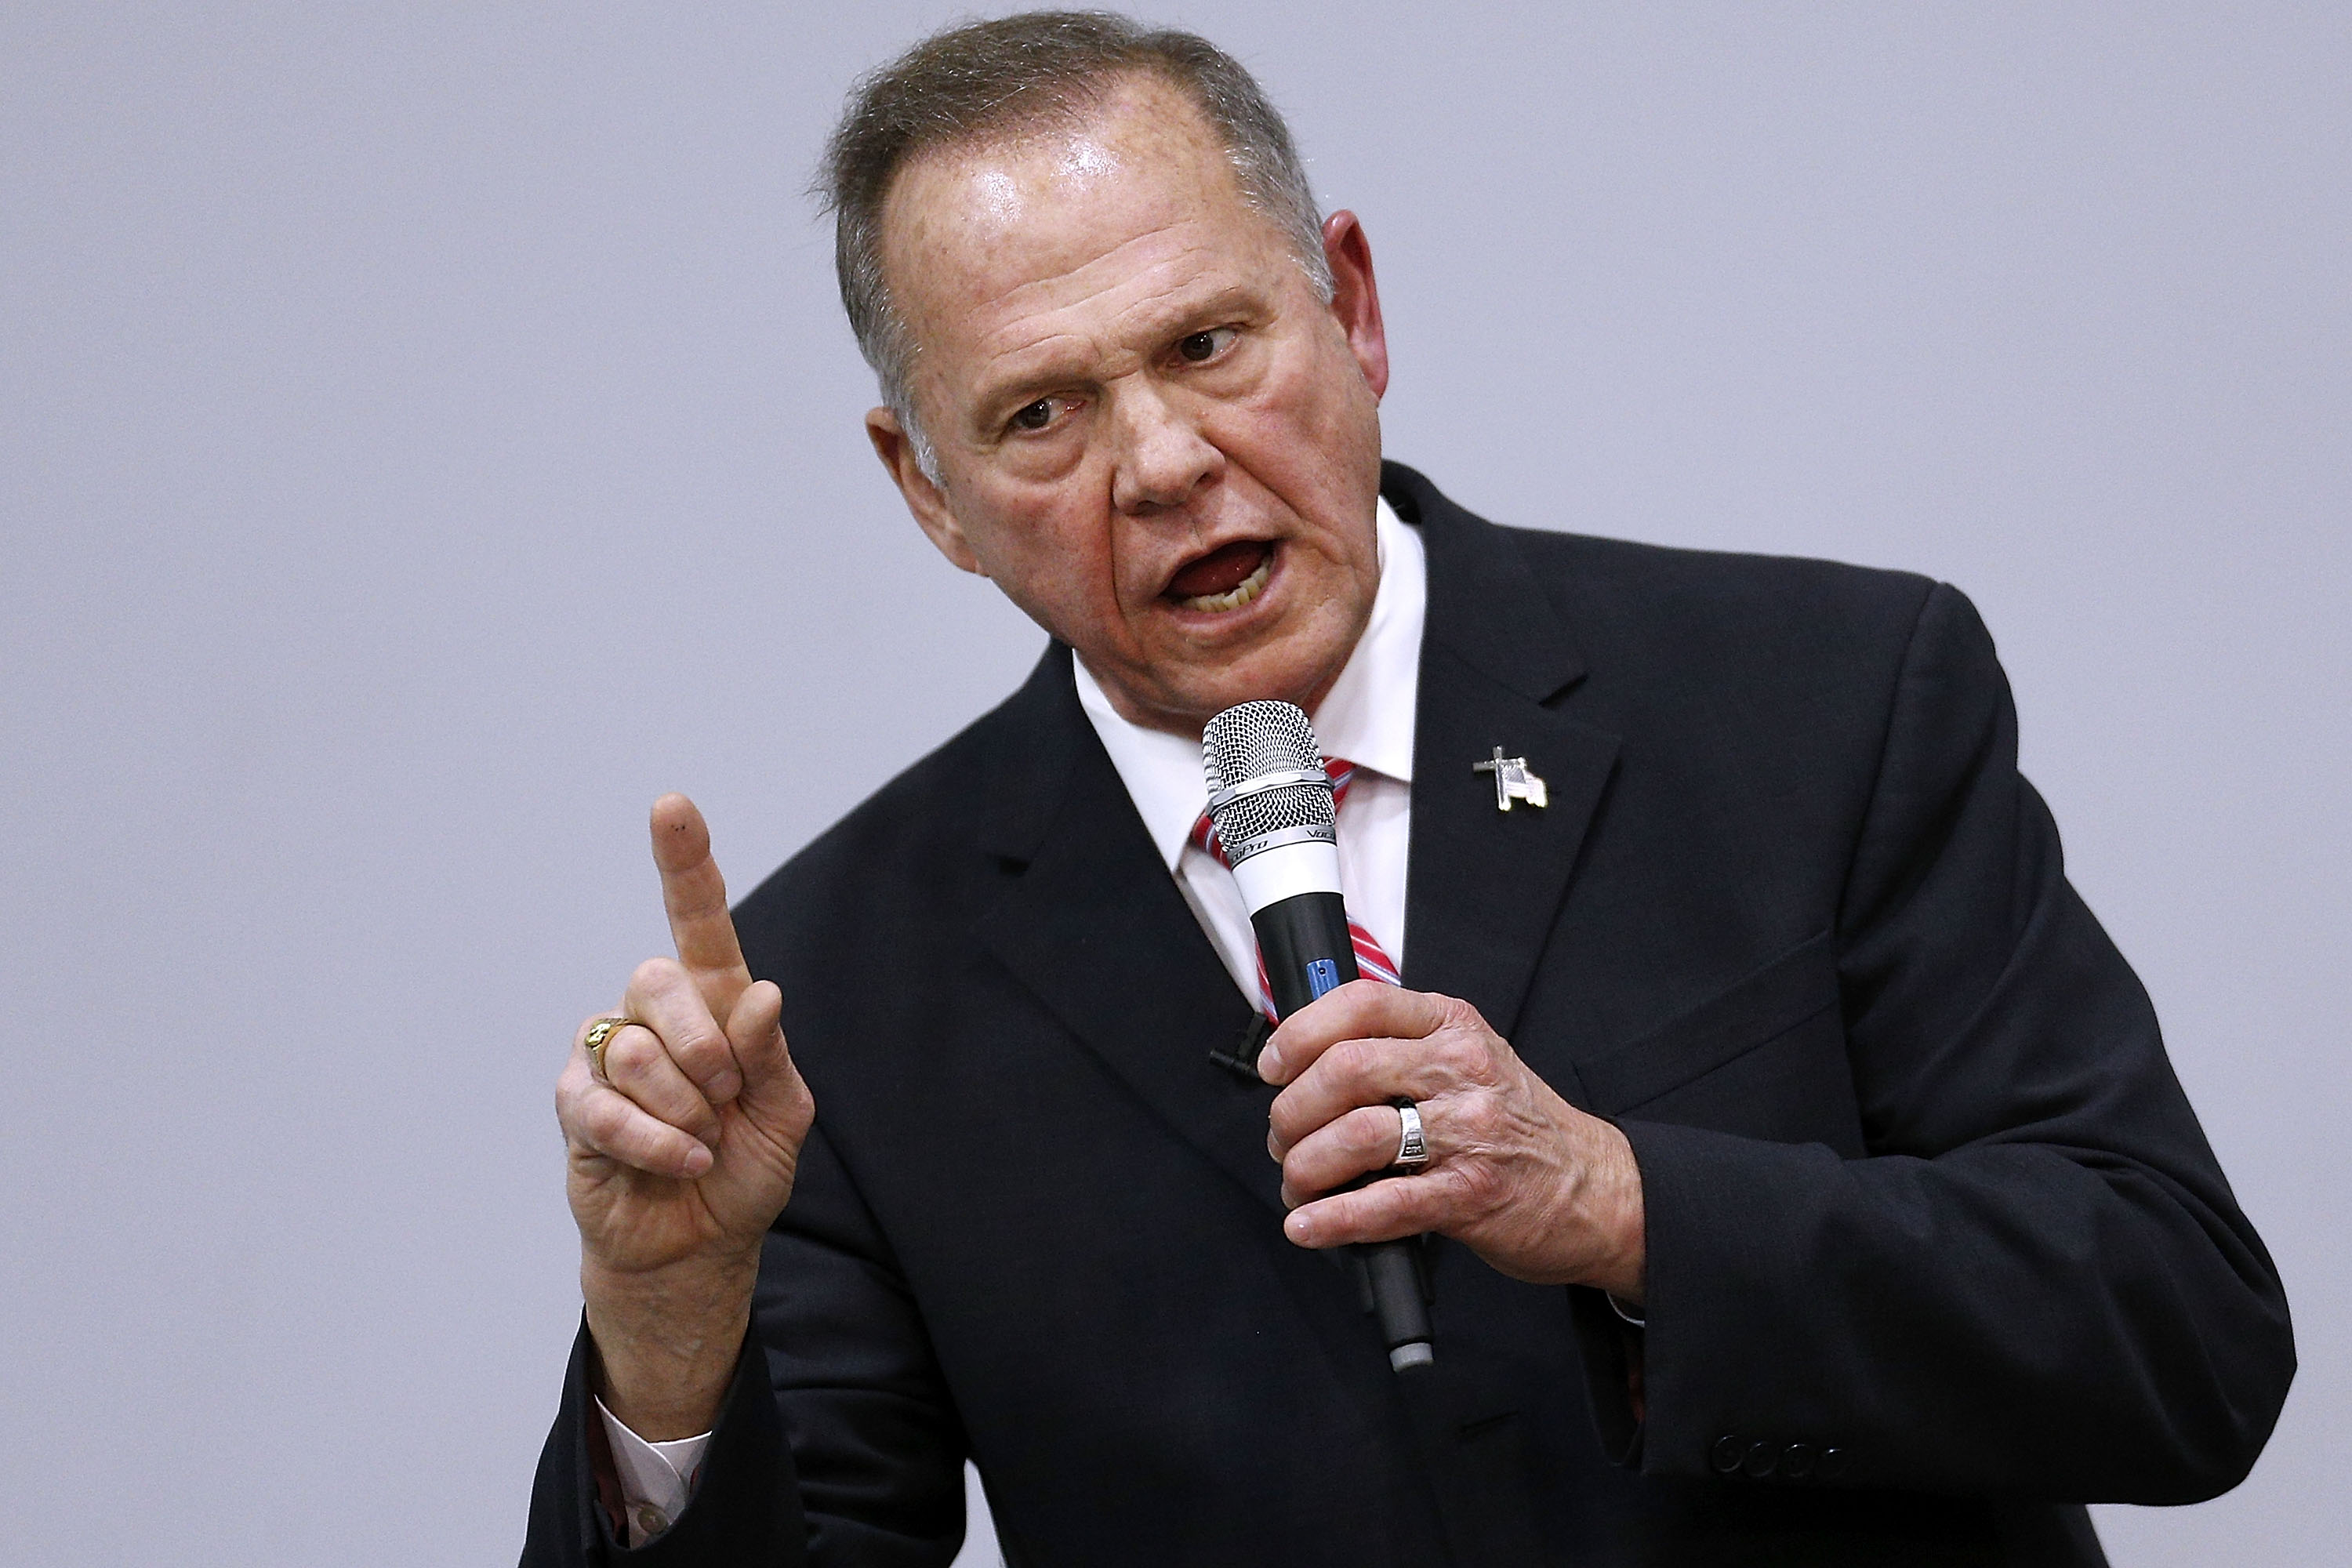 Republican candidate for U.S. Senate Judge Roy Moore speaks  in Jackson, Ala. on Nov. 14, 2017. (Jonathan Bachman—Getty Images)